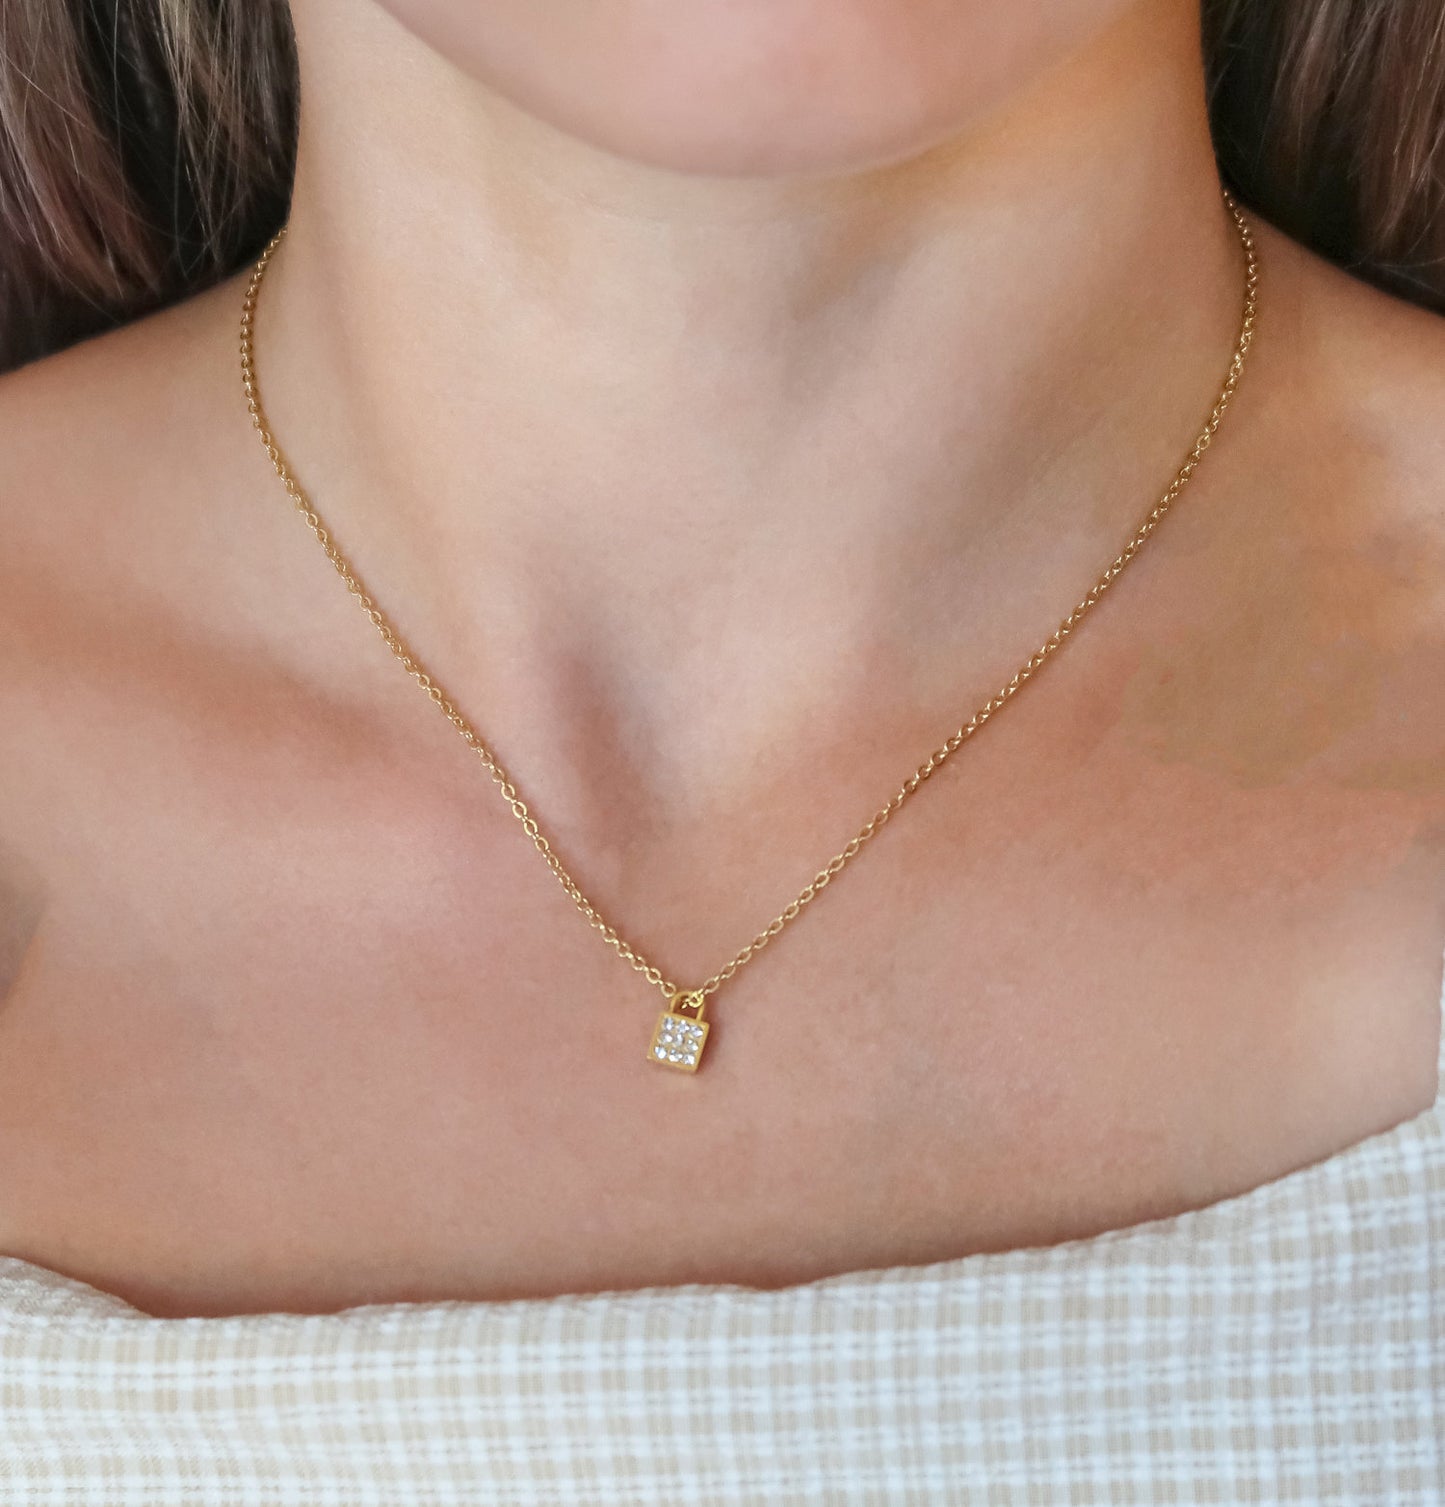 Dainty Gold Lock Necklace, Tiny Lock Necklace, Lock Layering Necklace, Padlock Necklace, Anniversary Gift,  Gold Filled, Sterling Silver - Anya Collection